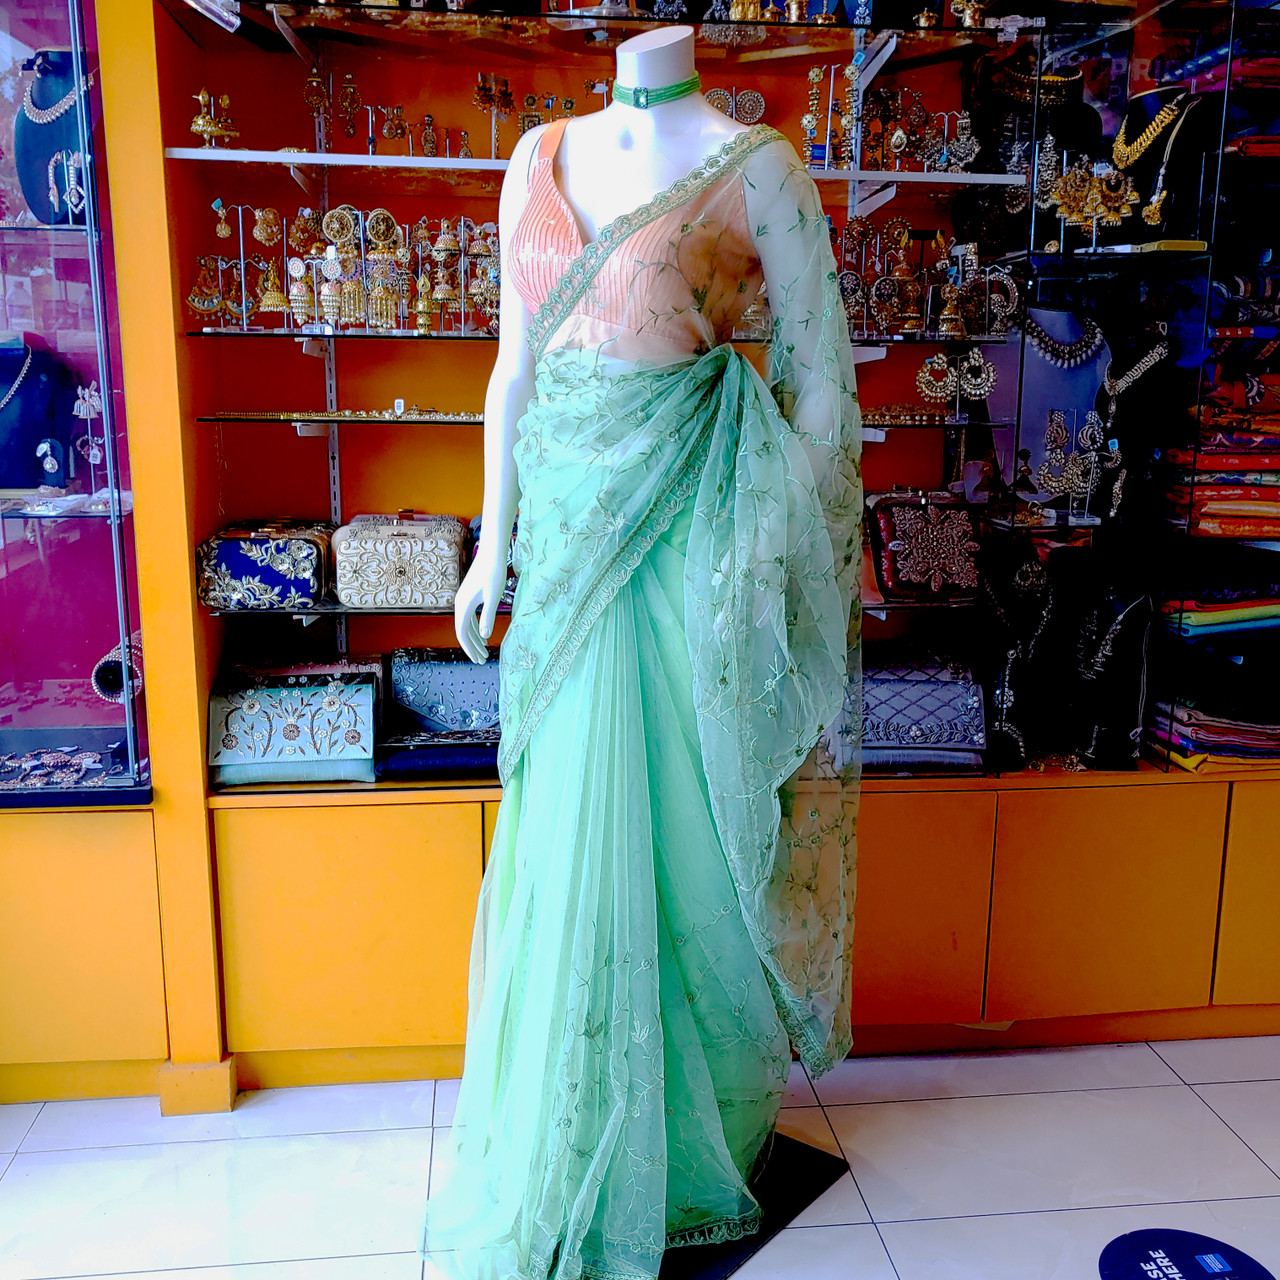 New Product Intro offer: Satin saree with Digital print blouse (material)  18 colours available. By online and save 25% off limited time only., By  Pradon Silks